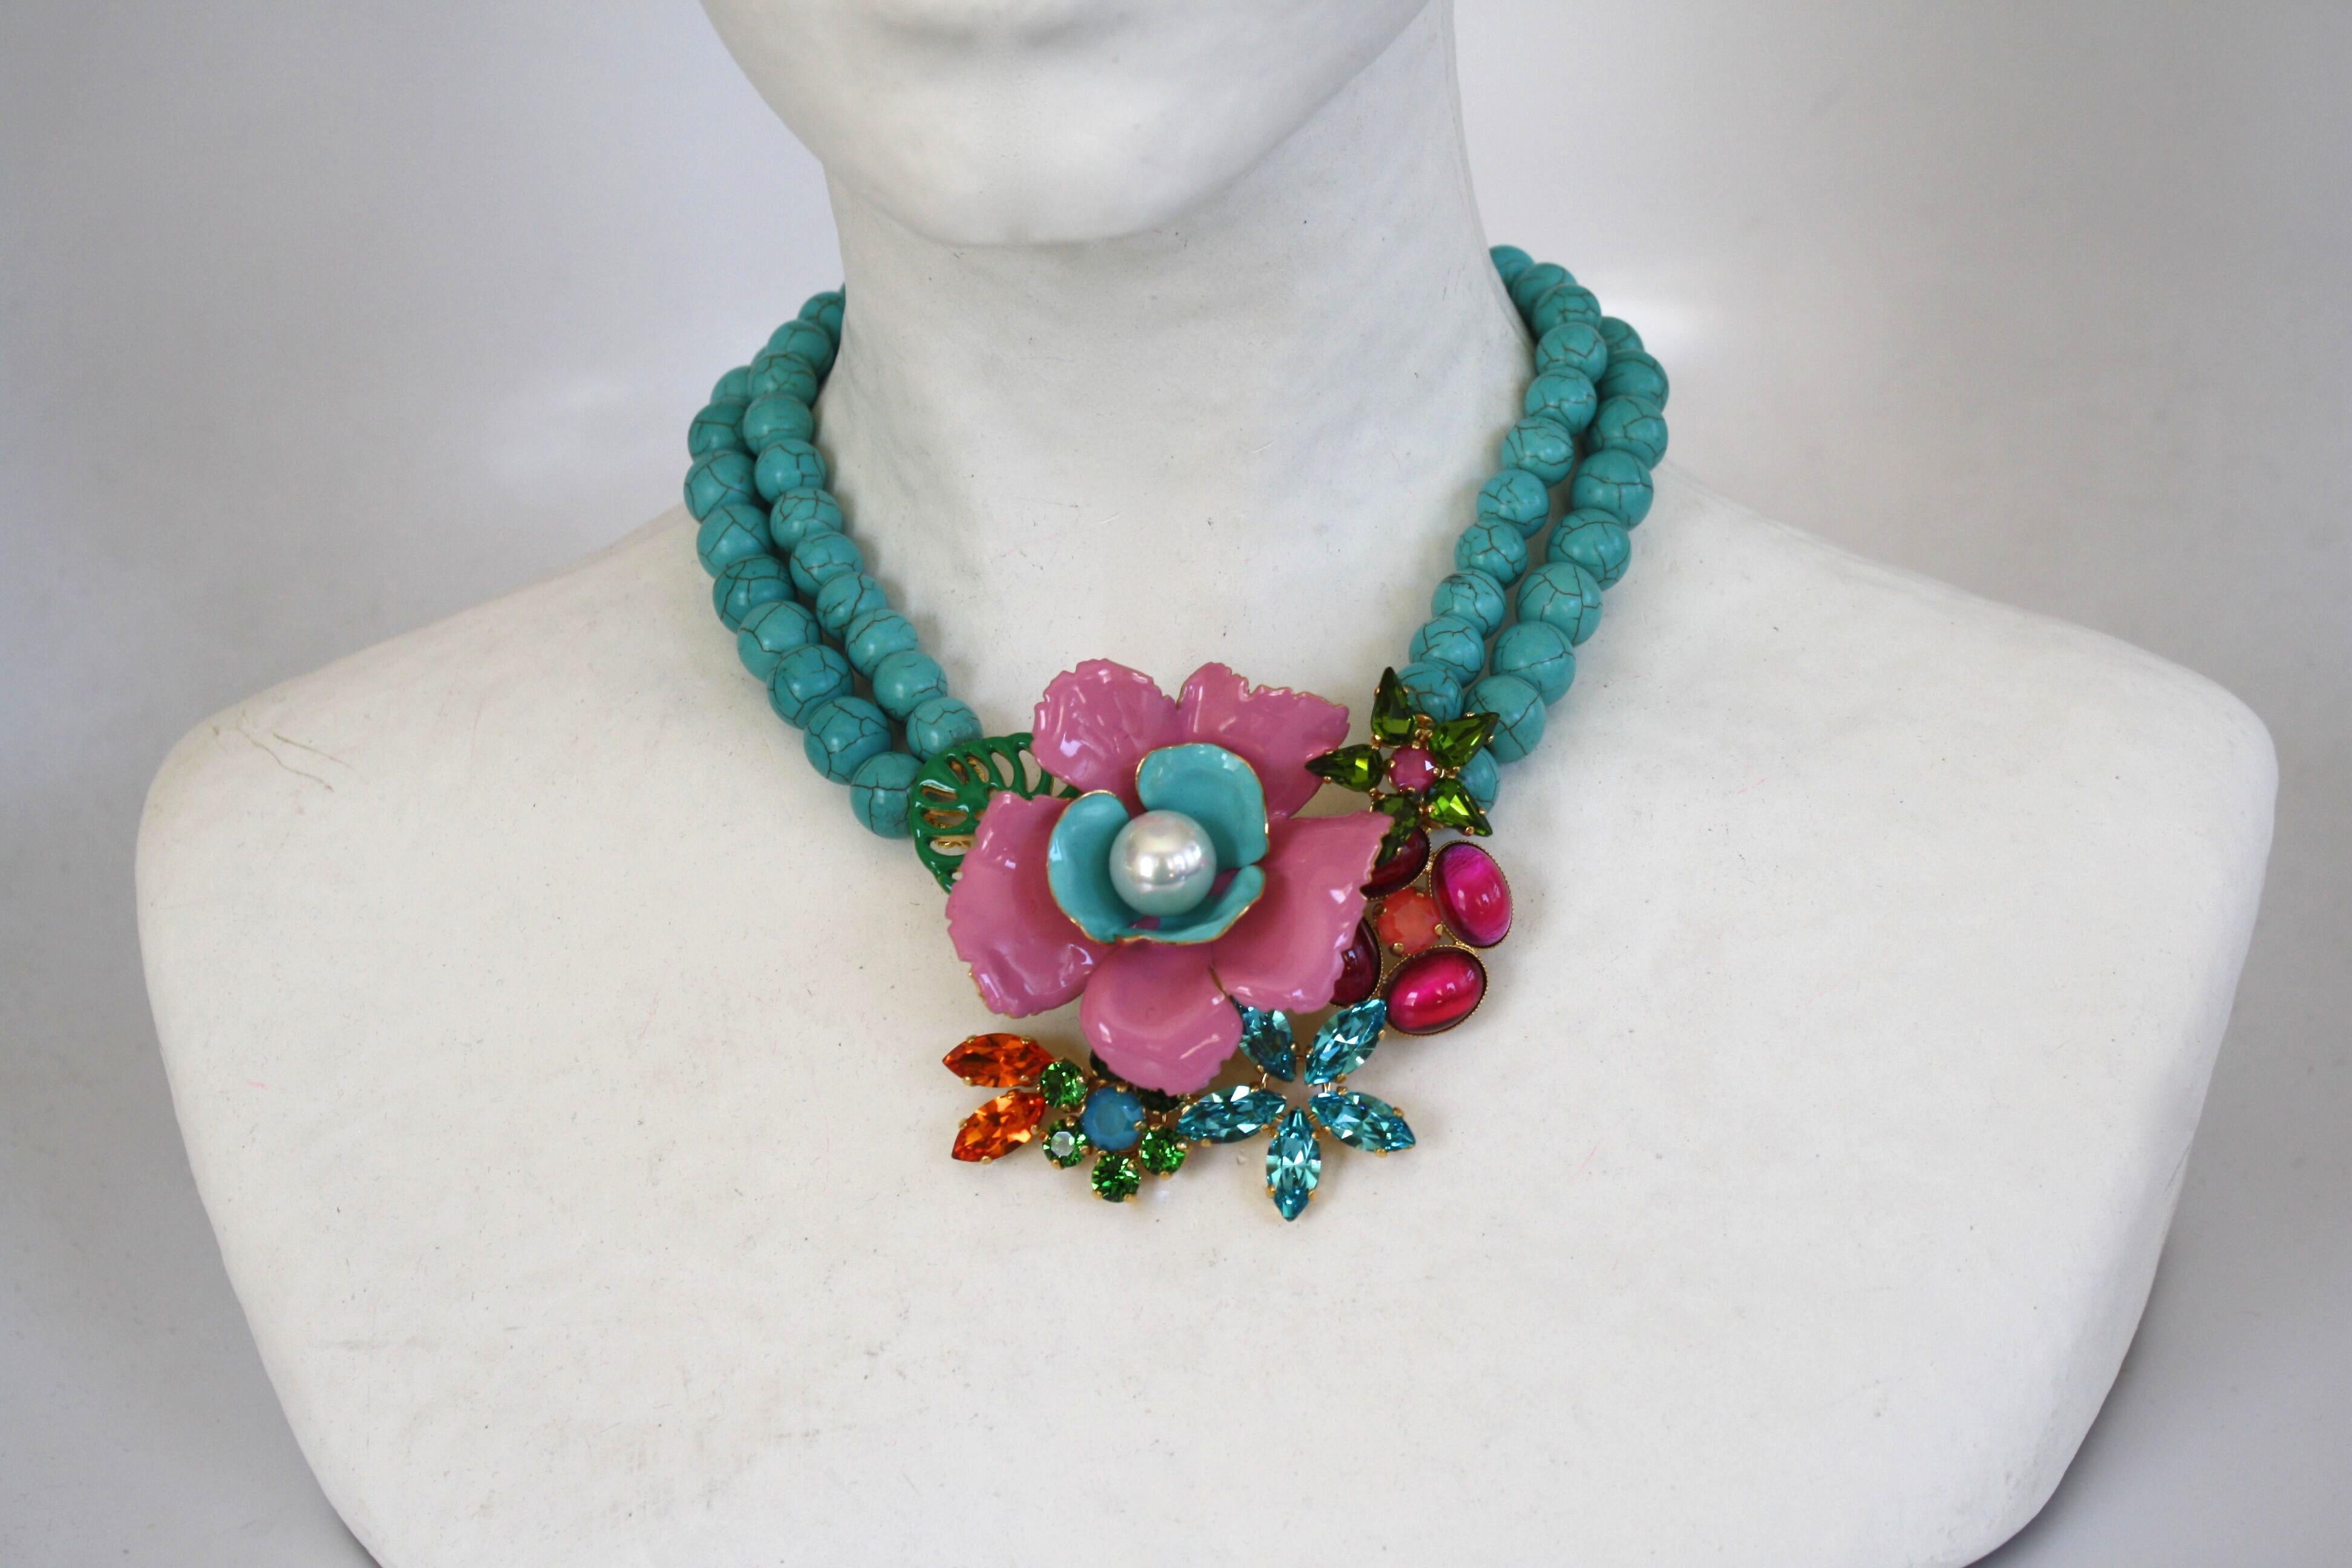 Turquoise bead necklace with enamel and Swarovski Crystal flowers from Philippe Ferrandis.
